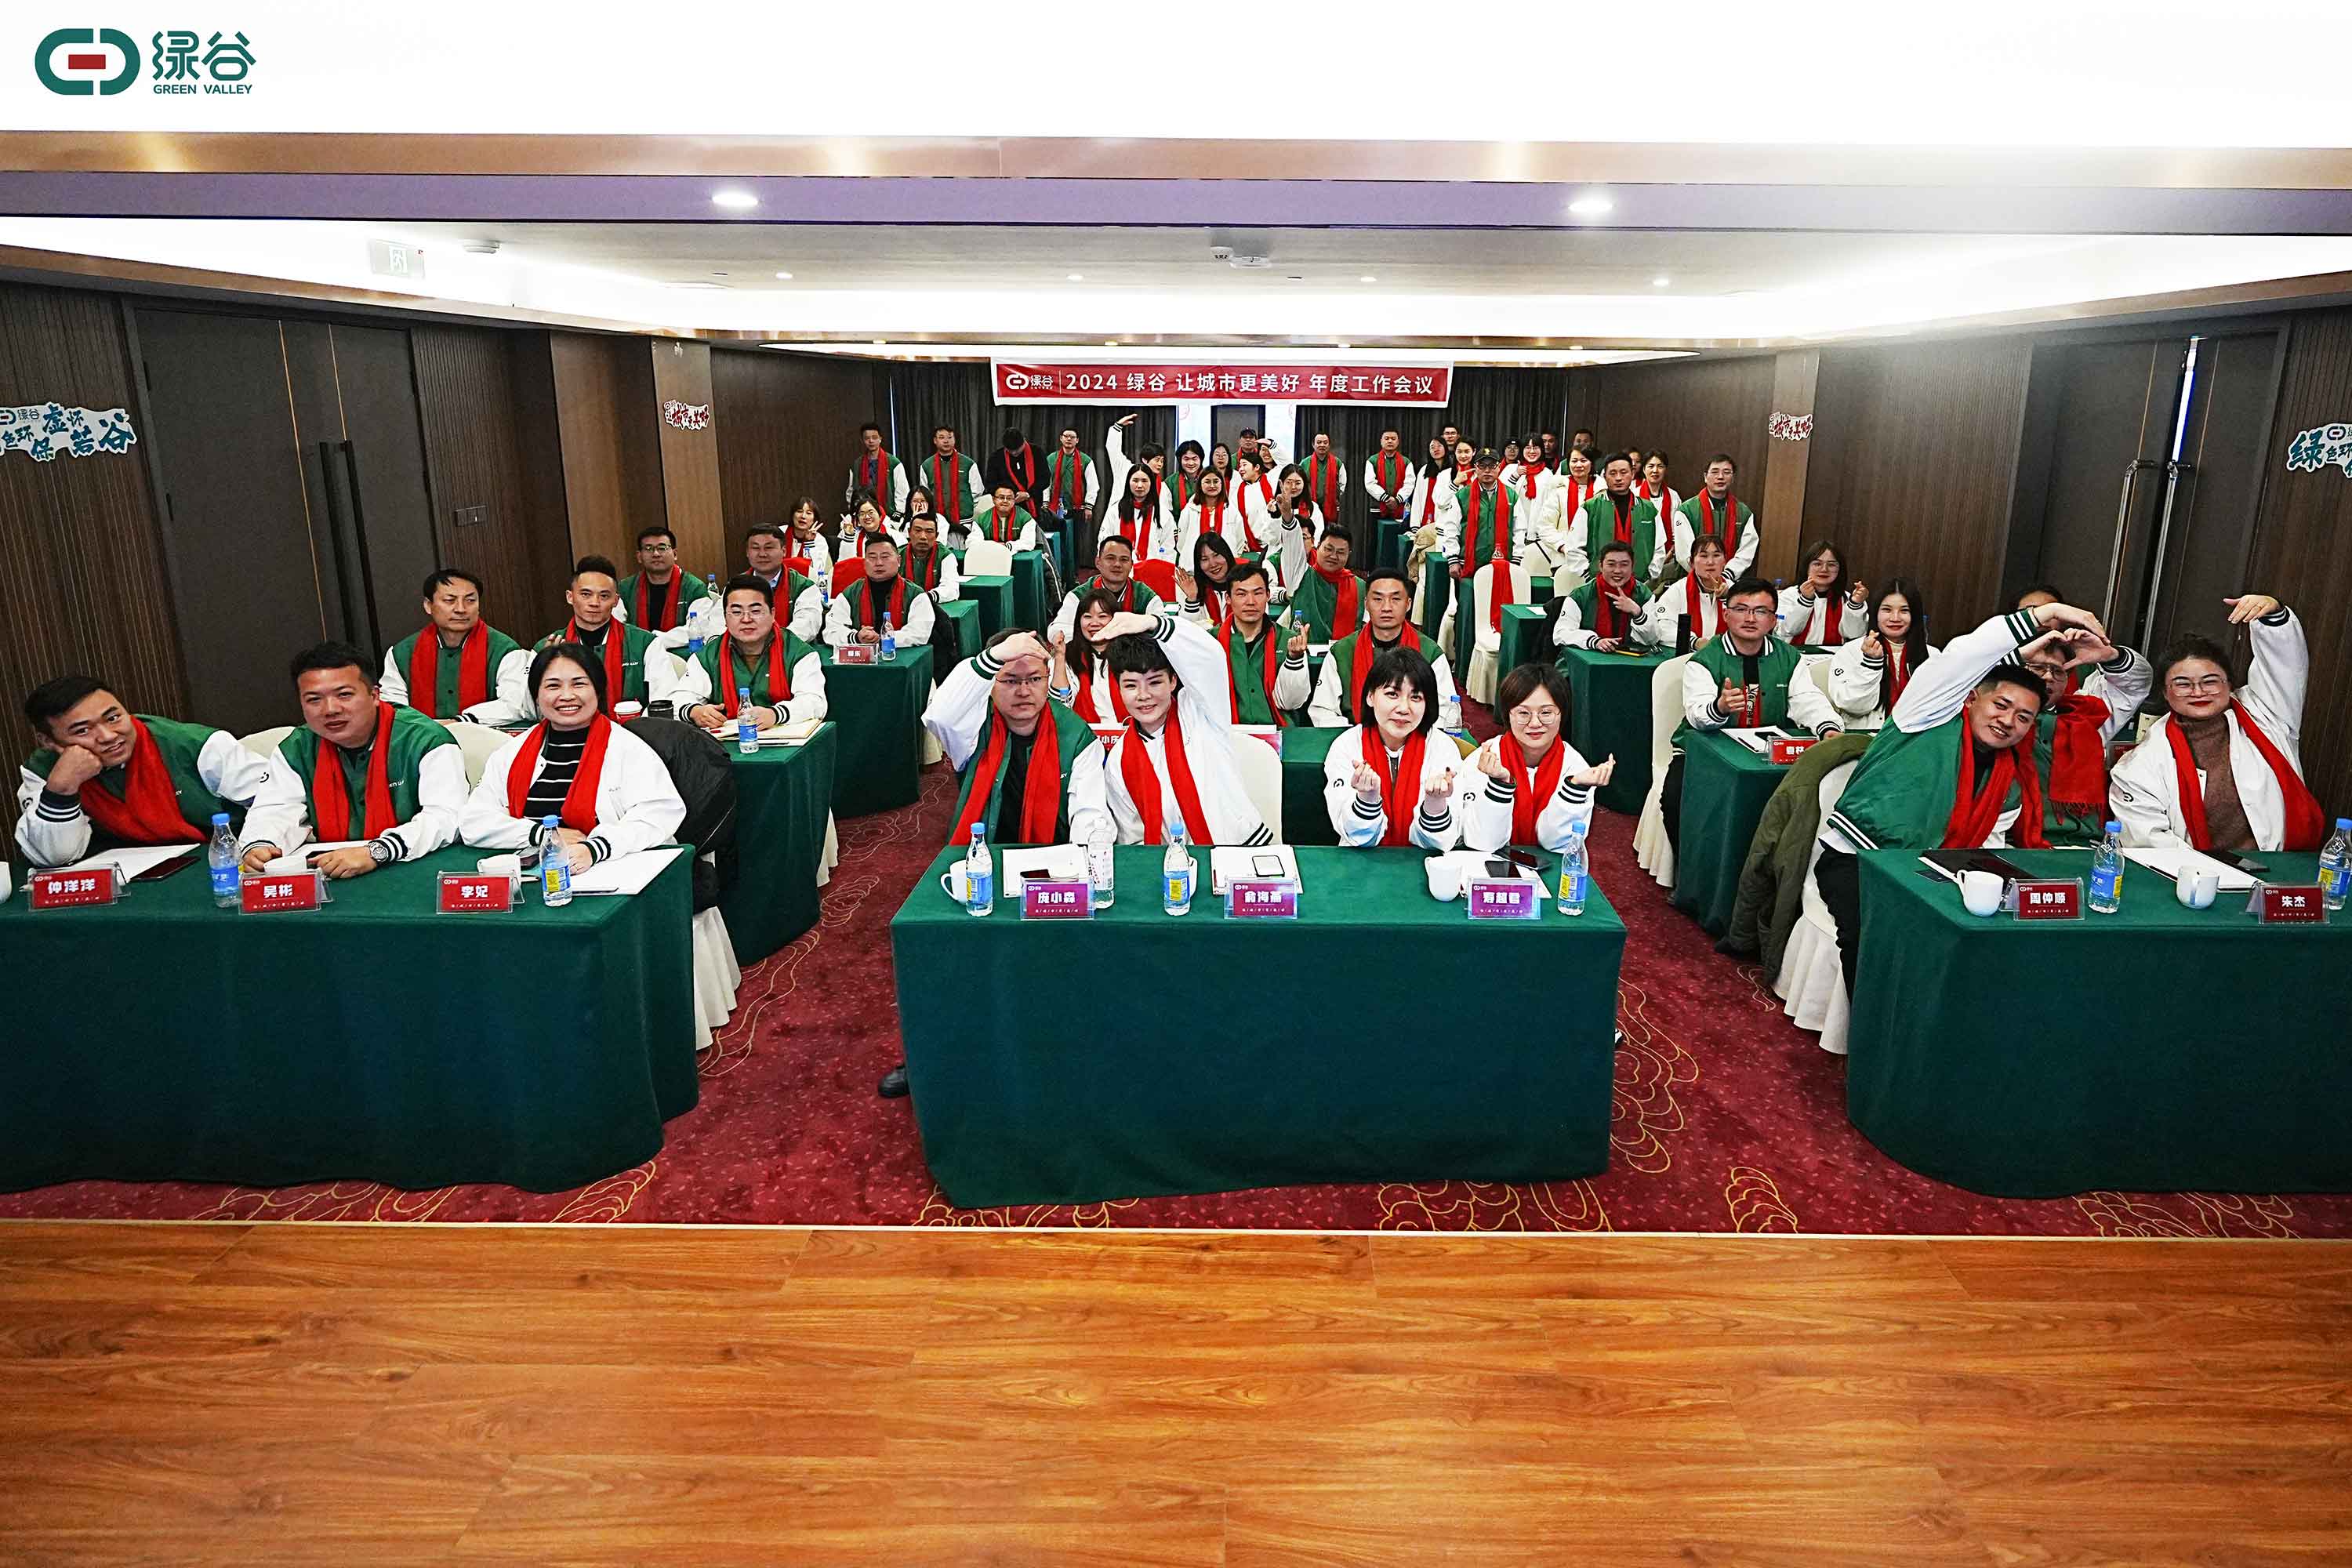 Company News | Green Valley annual work conference and New Year activities concluded successfully